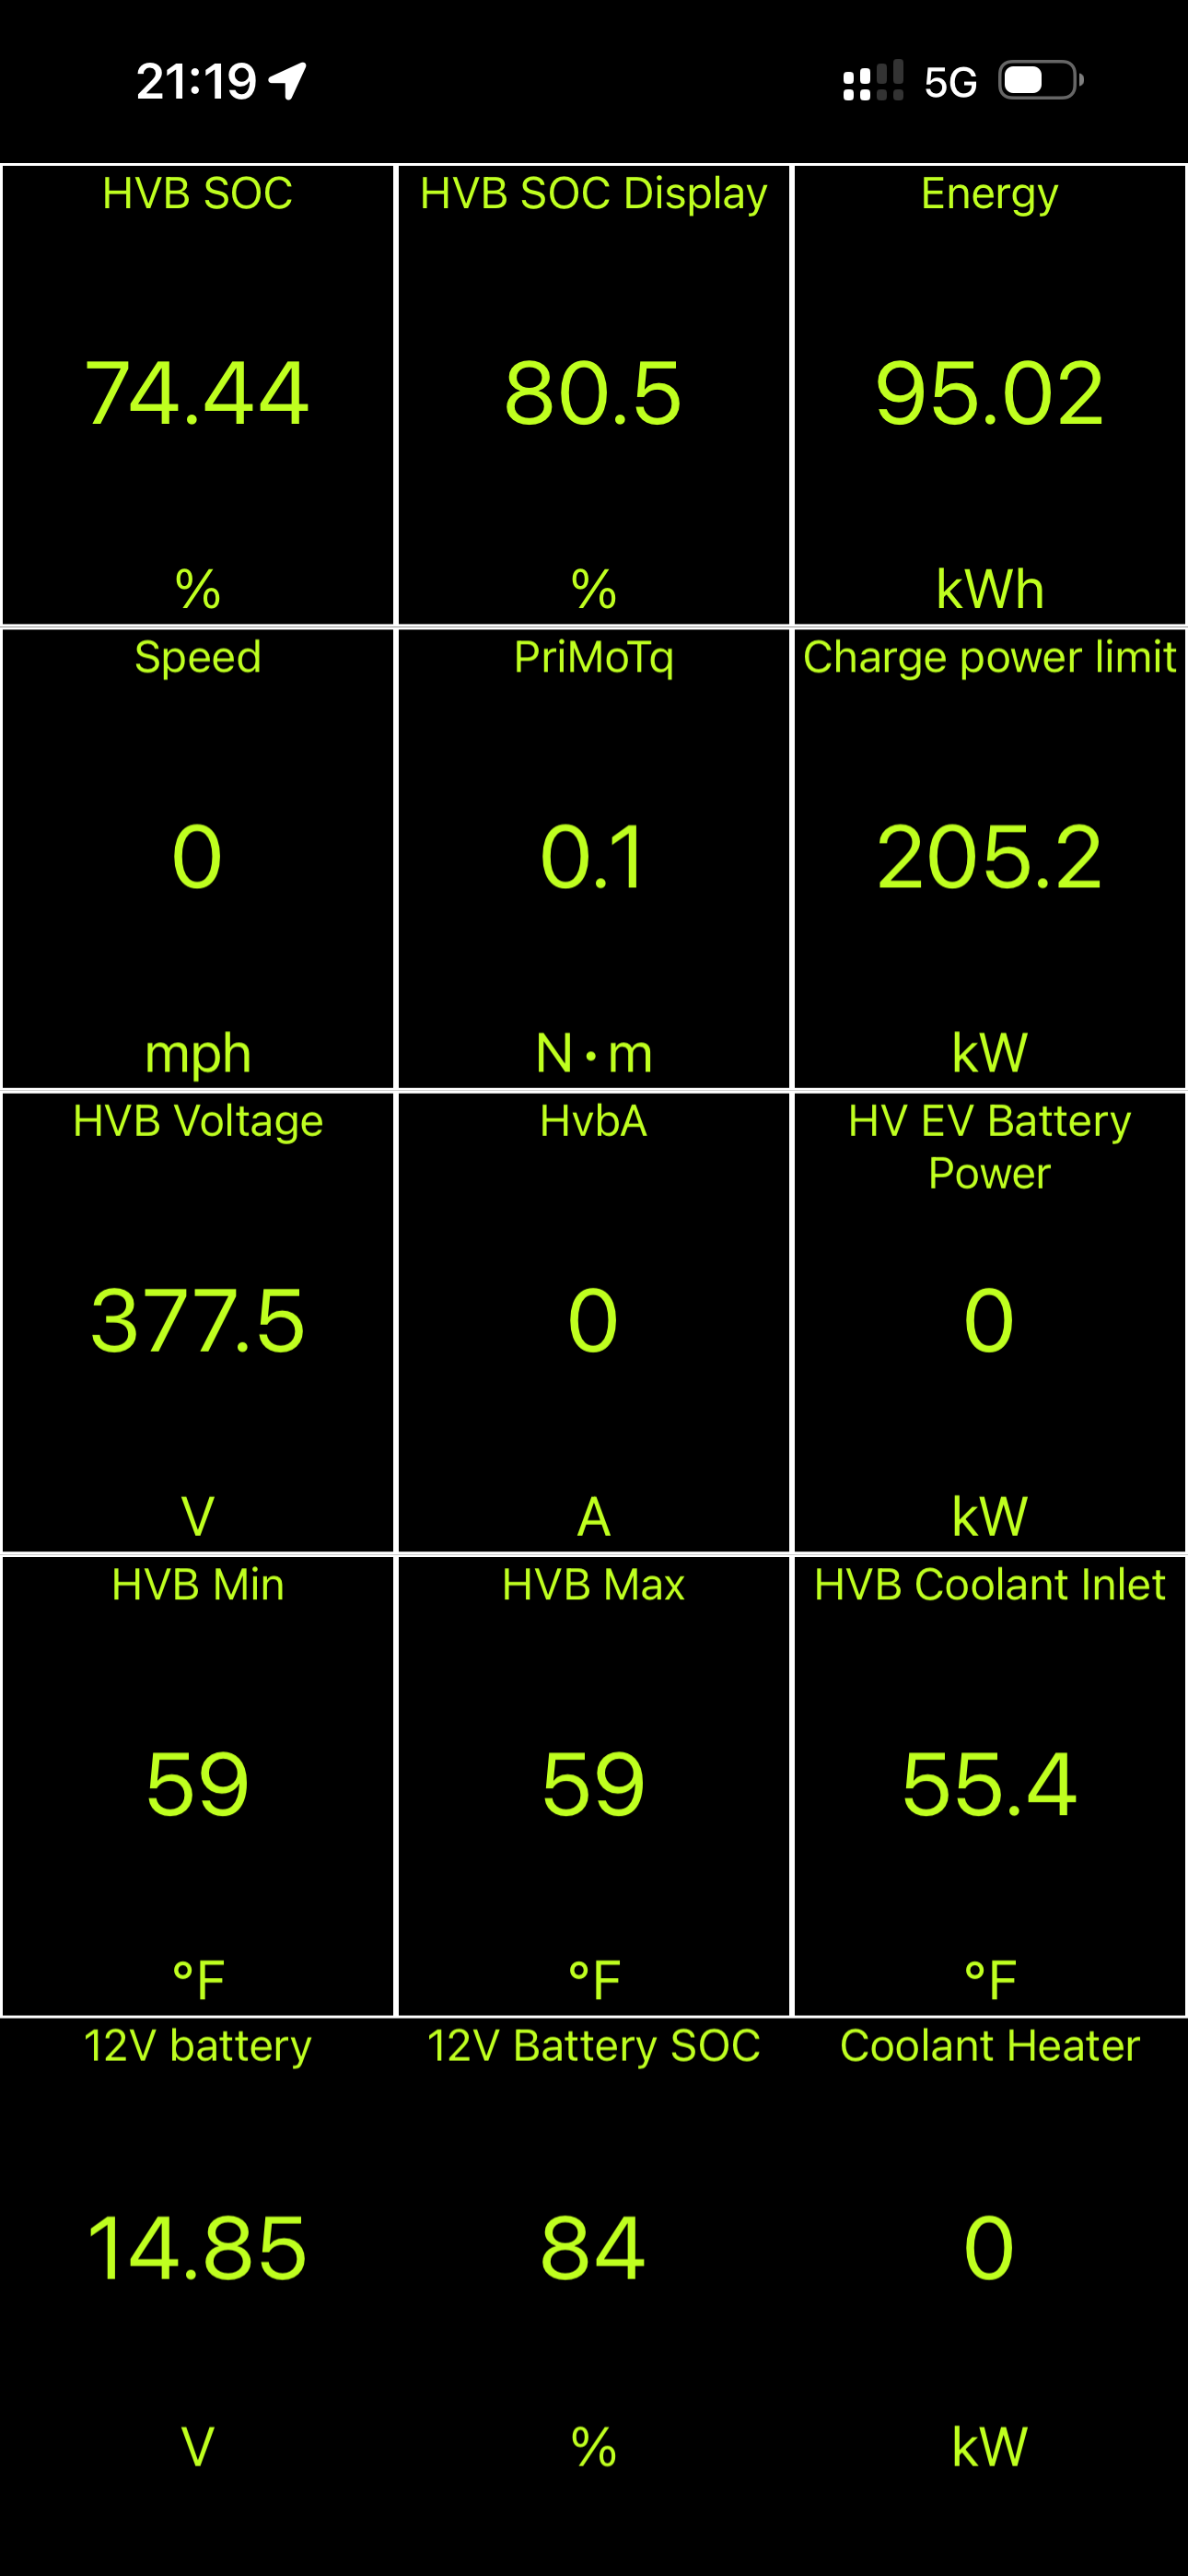 Ford F-150 Lightning Car Scanner App Template (For Real-Time Charging, Battery and Range Telemetry) IMG_3171.PNG